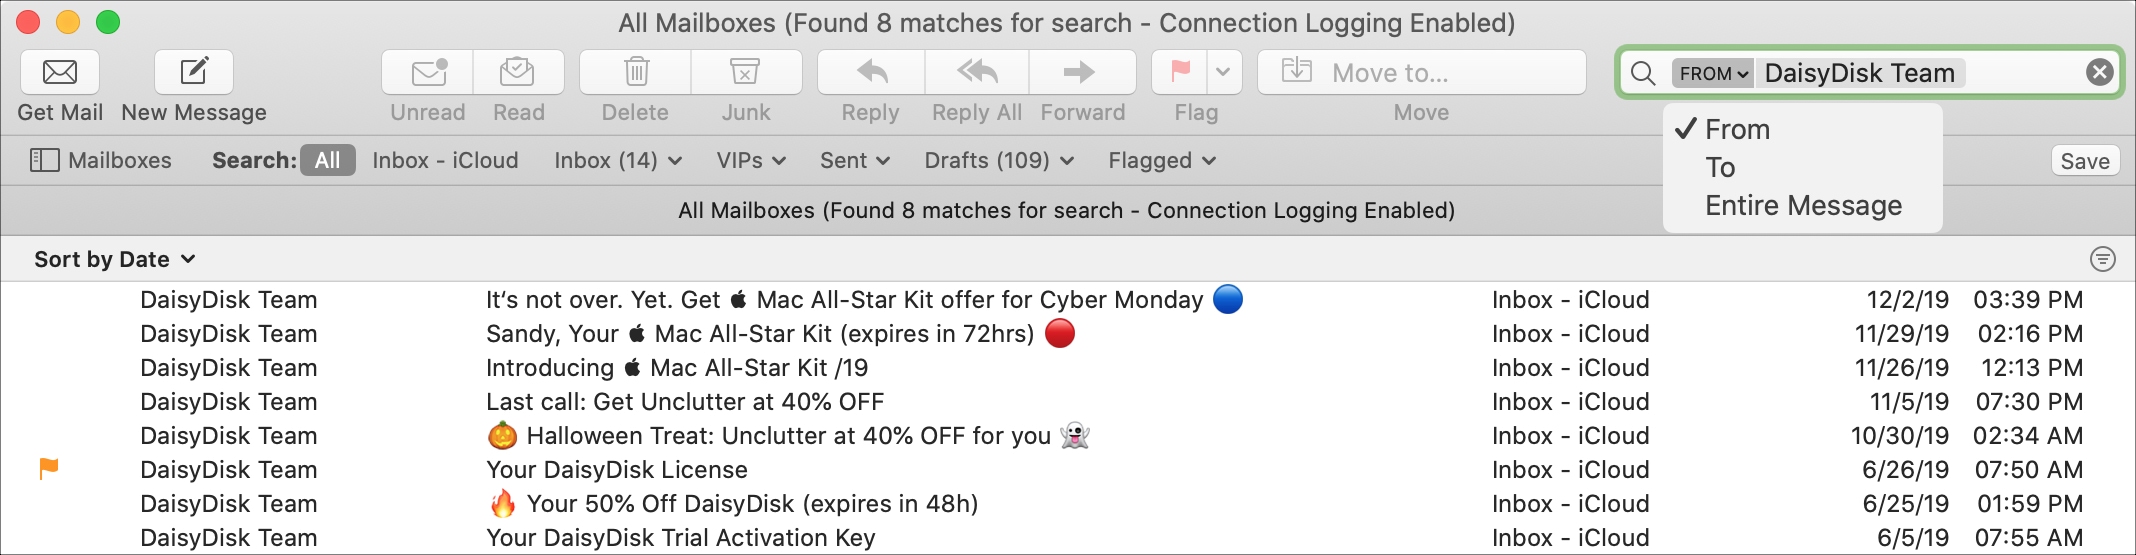 Mail Search Filters From To Entire